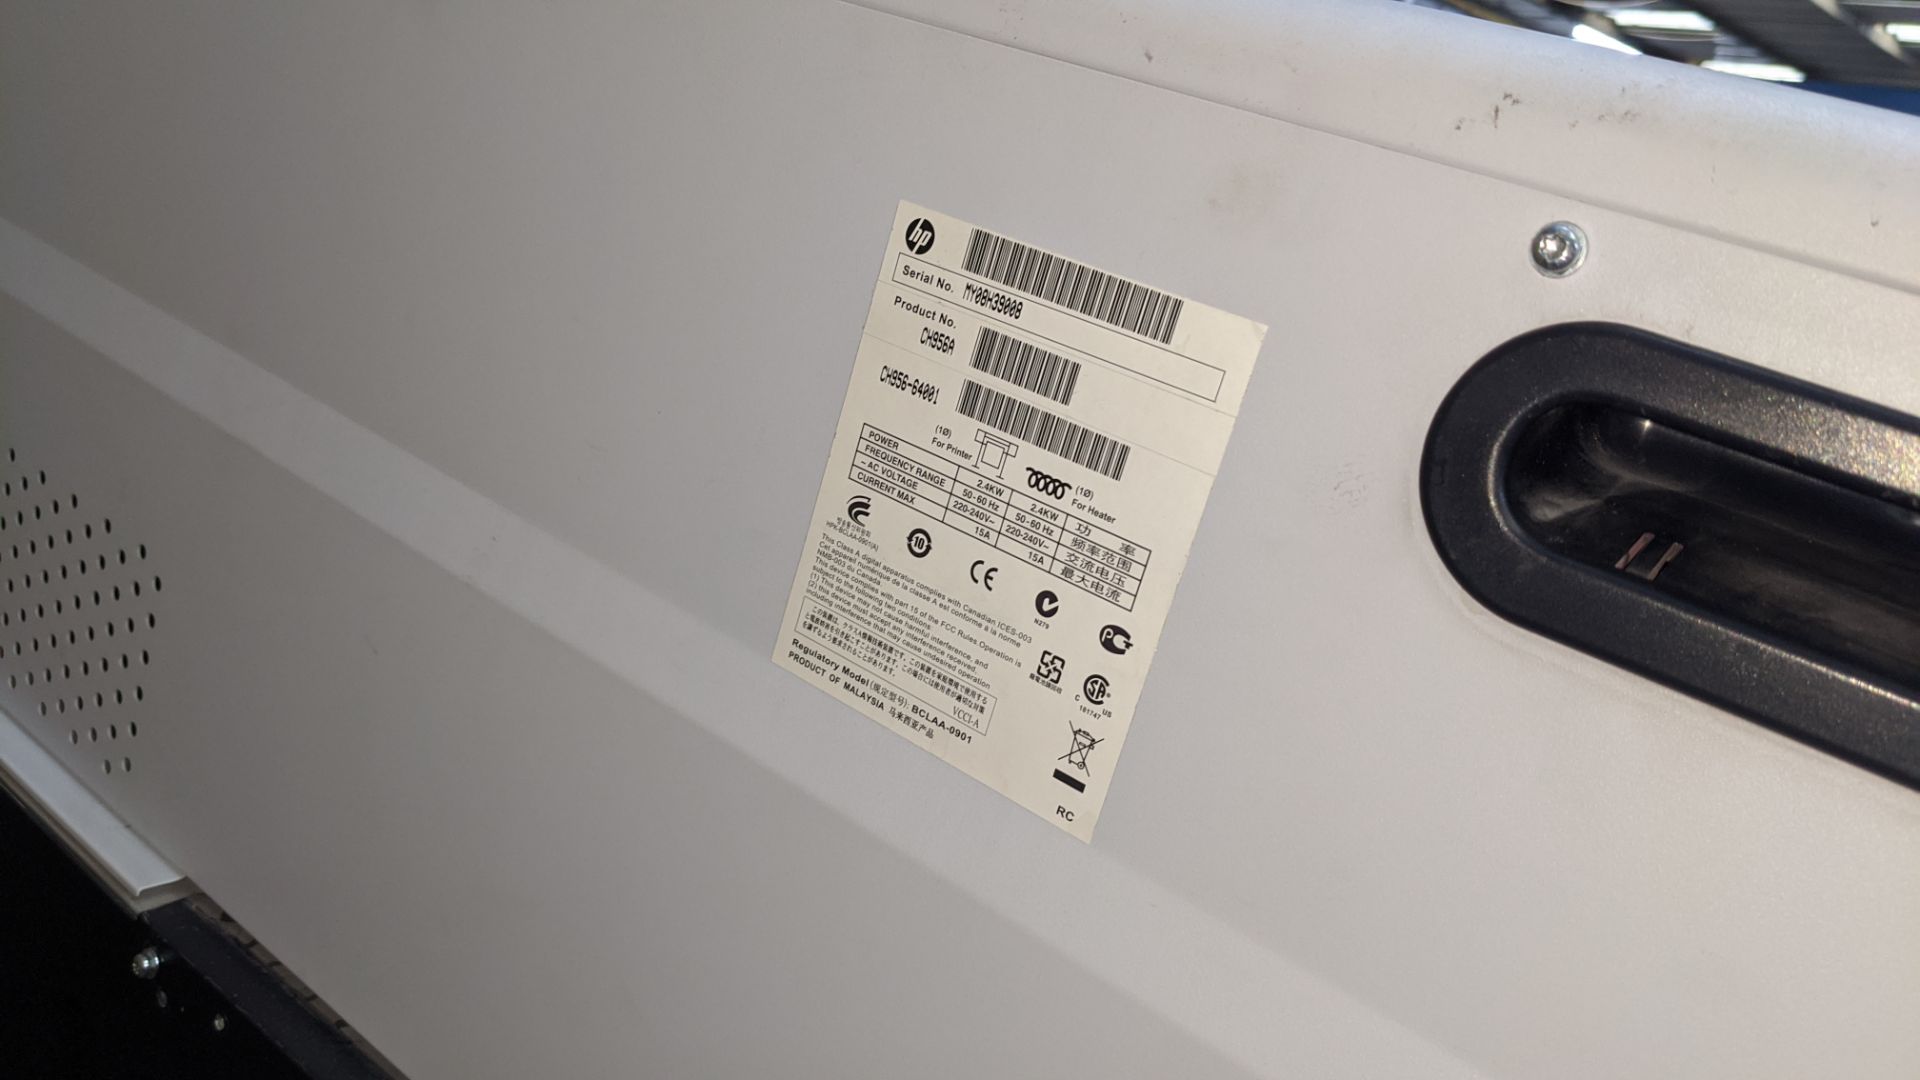 HP DesignJet L25500 wide format printer, serial no. MY08H39008, product no. CH956A/CH956-64001. NB - Image 4 of 7